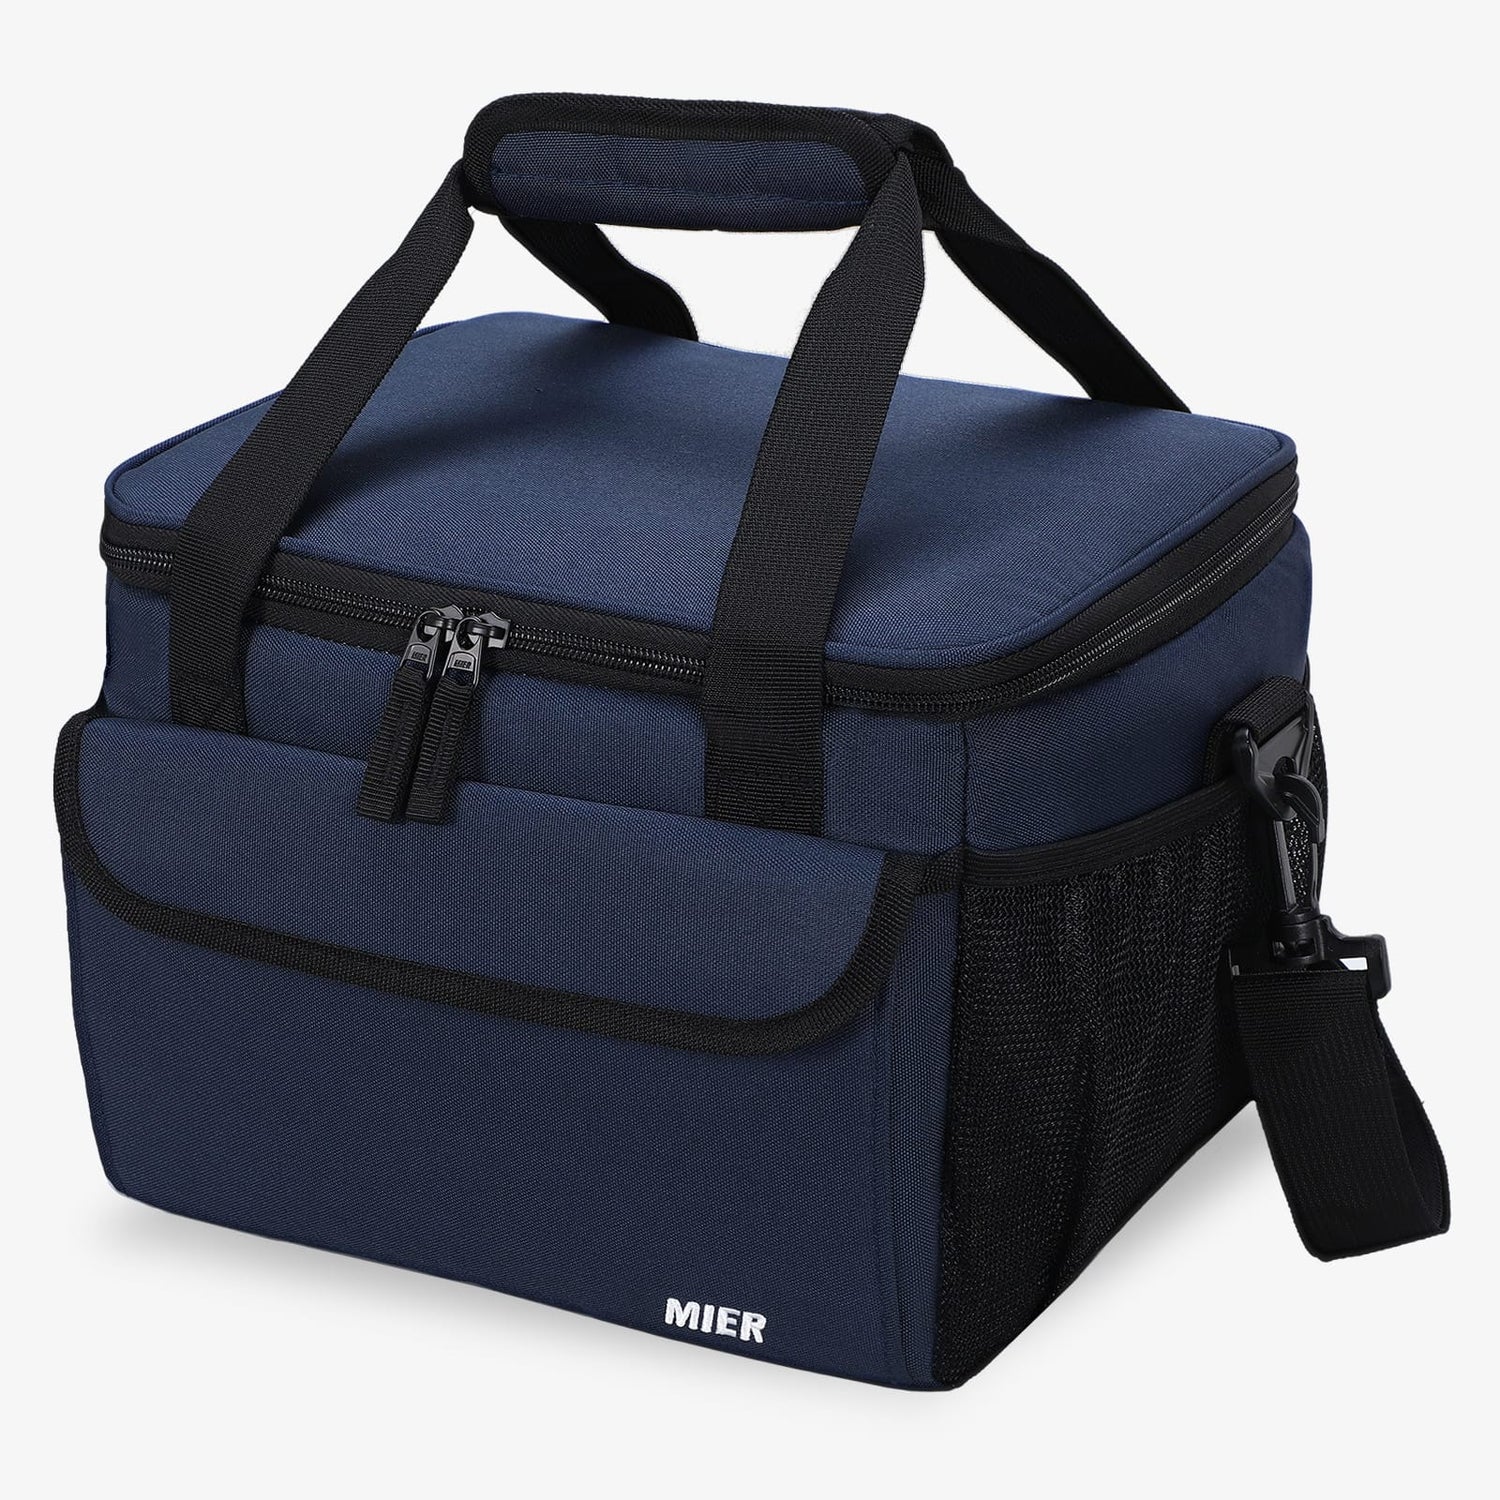 Large Lunch Box for Men Insulated Lunch Bags Adult Lunch Bag Dark Blue MIER